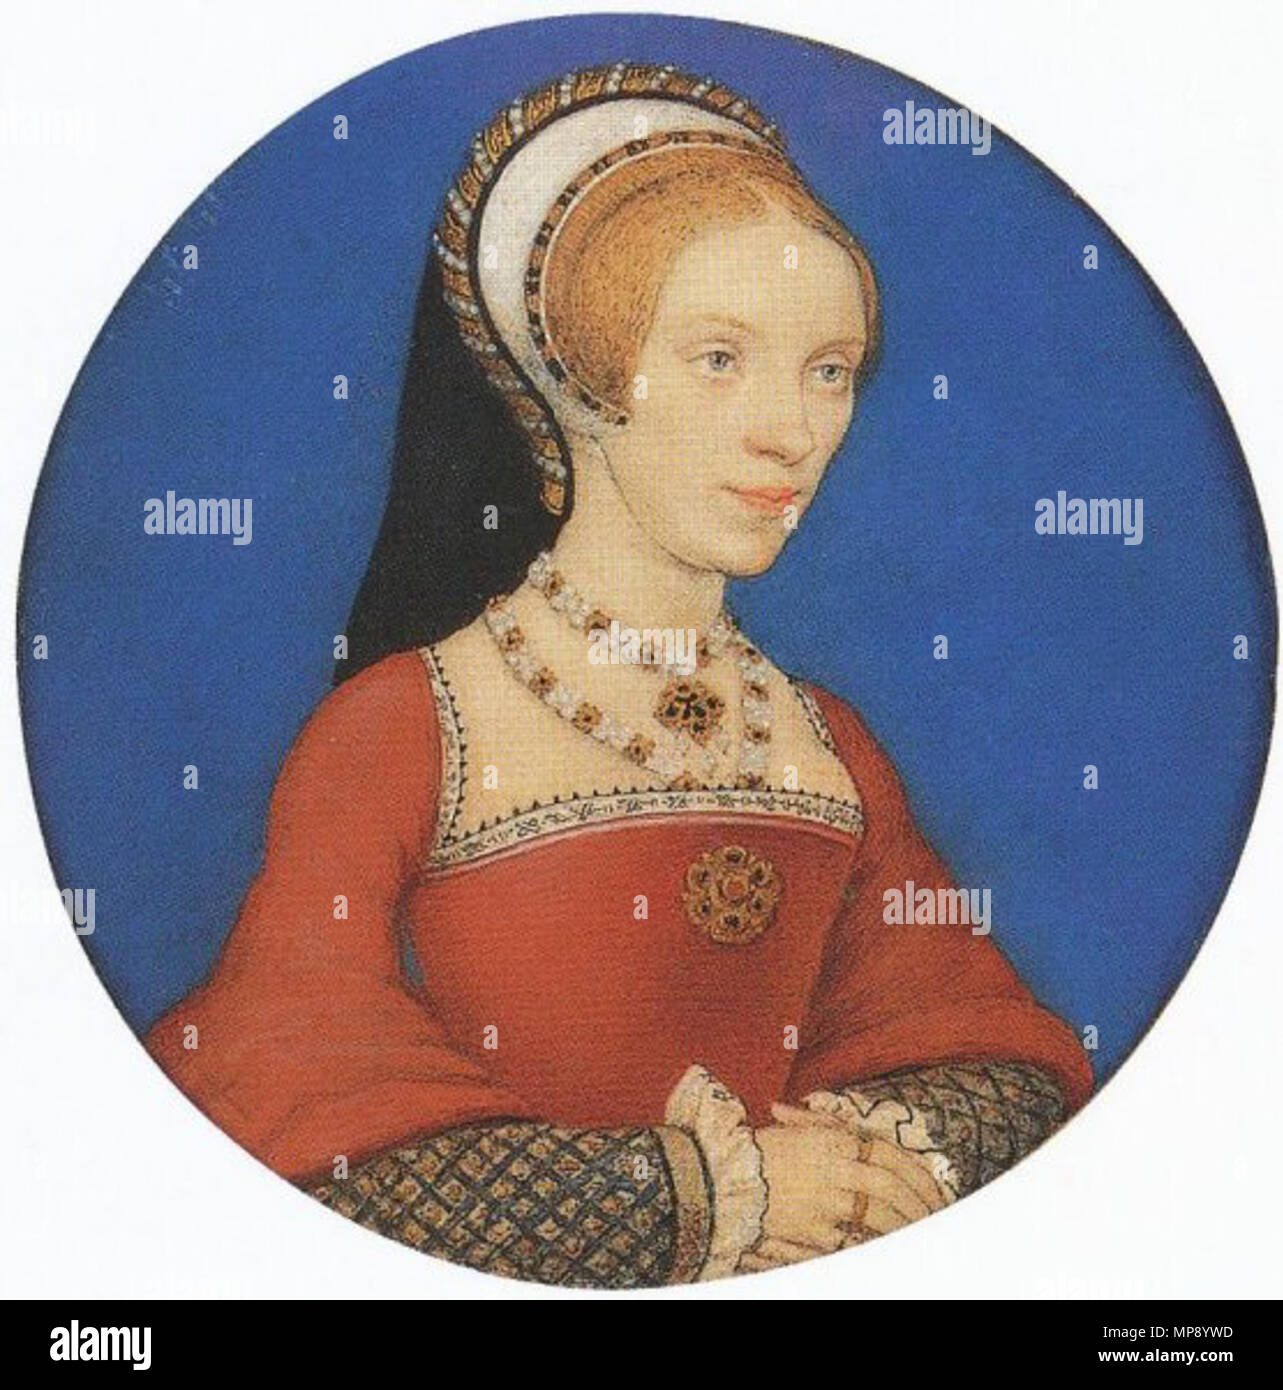 . English: Portrait Miniature of Elizabeth, Lady Audley. Watercolour on vellum mounted on playing card, 5.6 cm diameter, Royal Collection, Windsor Castle. This portrait is based on Holbein's drawing inscribed, by a later hand than Holbein's, 'The Lady Audley'. There were two ladies called Elizabeth, Lady Audley. One was the daughter of Sir Brian Tuke, whom Holbein also painted; but she did not become Lady Audley until 1557. The more likely sitter is Elizabeth Grey (d. 1564), who married Lord Audley of Walden in 1538 (Foister, p. 106). circa 1538.   Hans Holbein  (1497/1498–1543)       Alternat Stock Photo